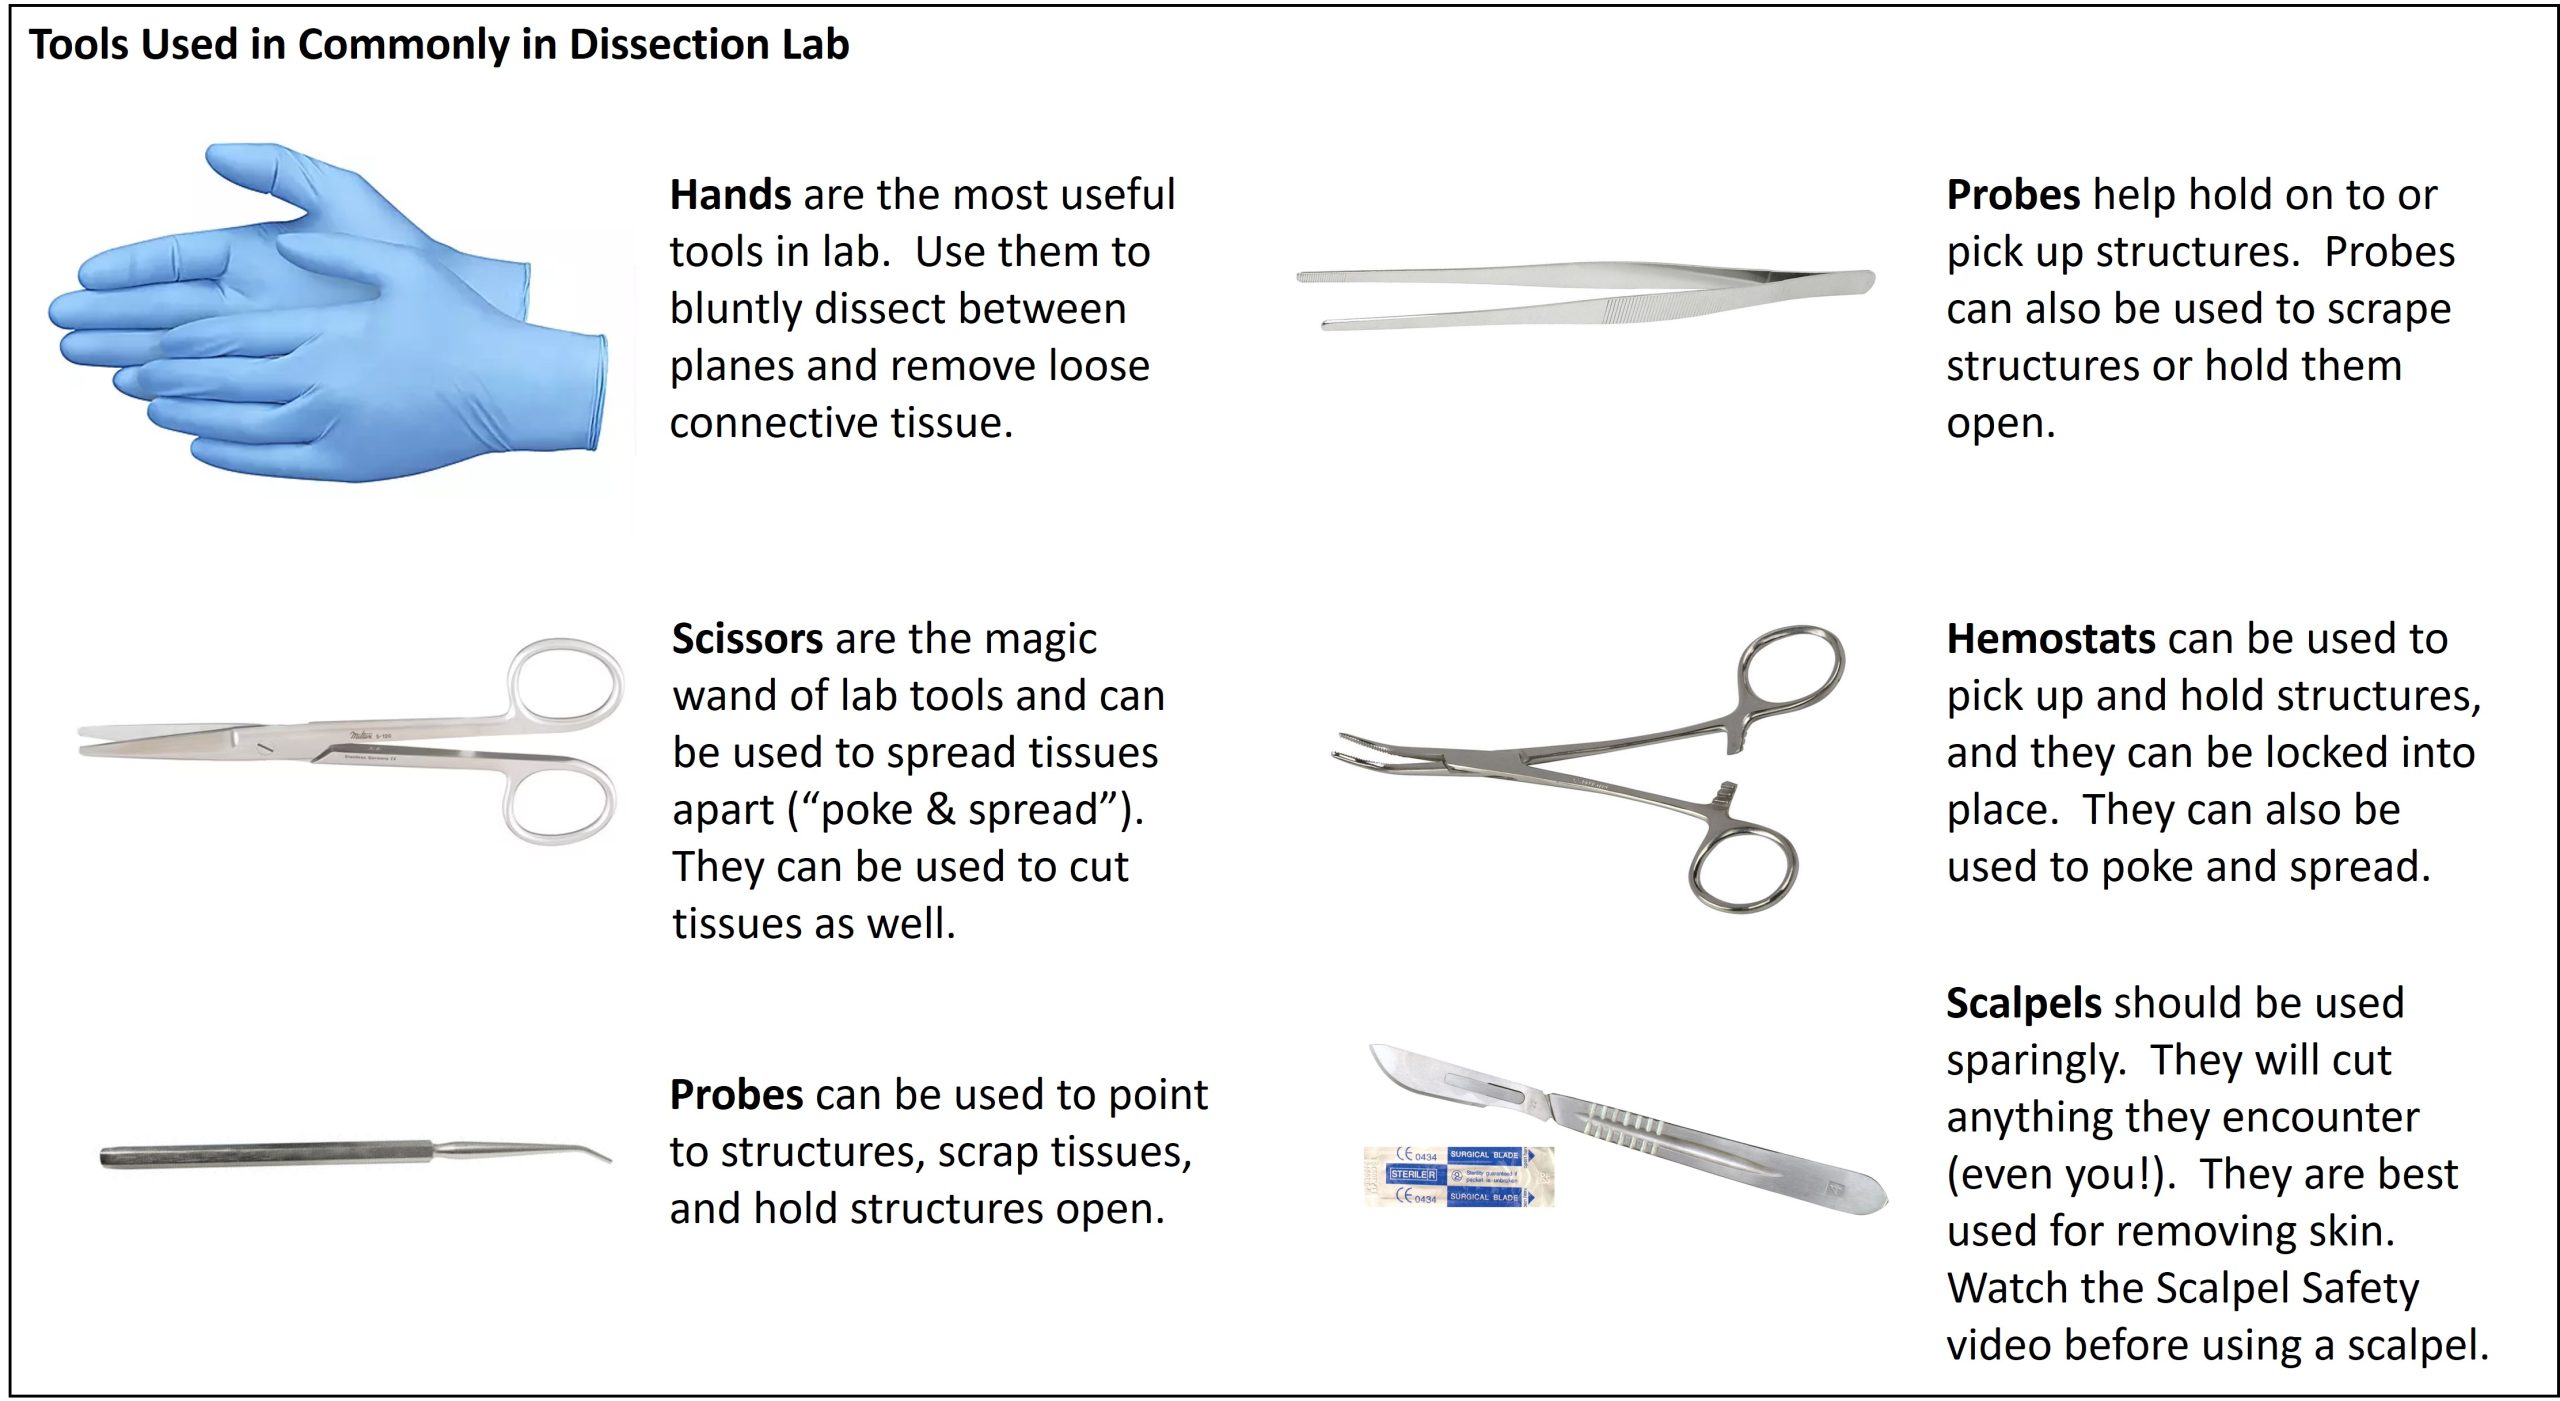 Common Tools Used in the Dissection Lab